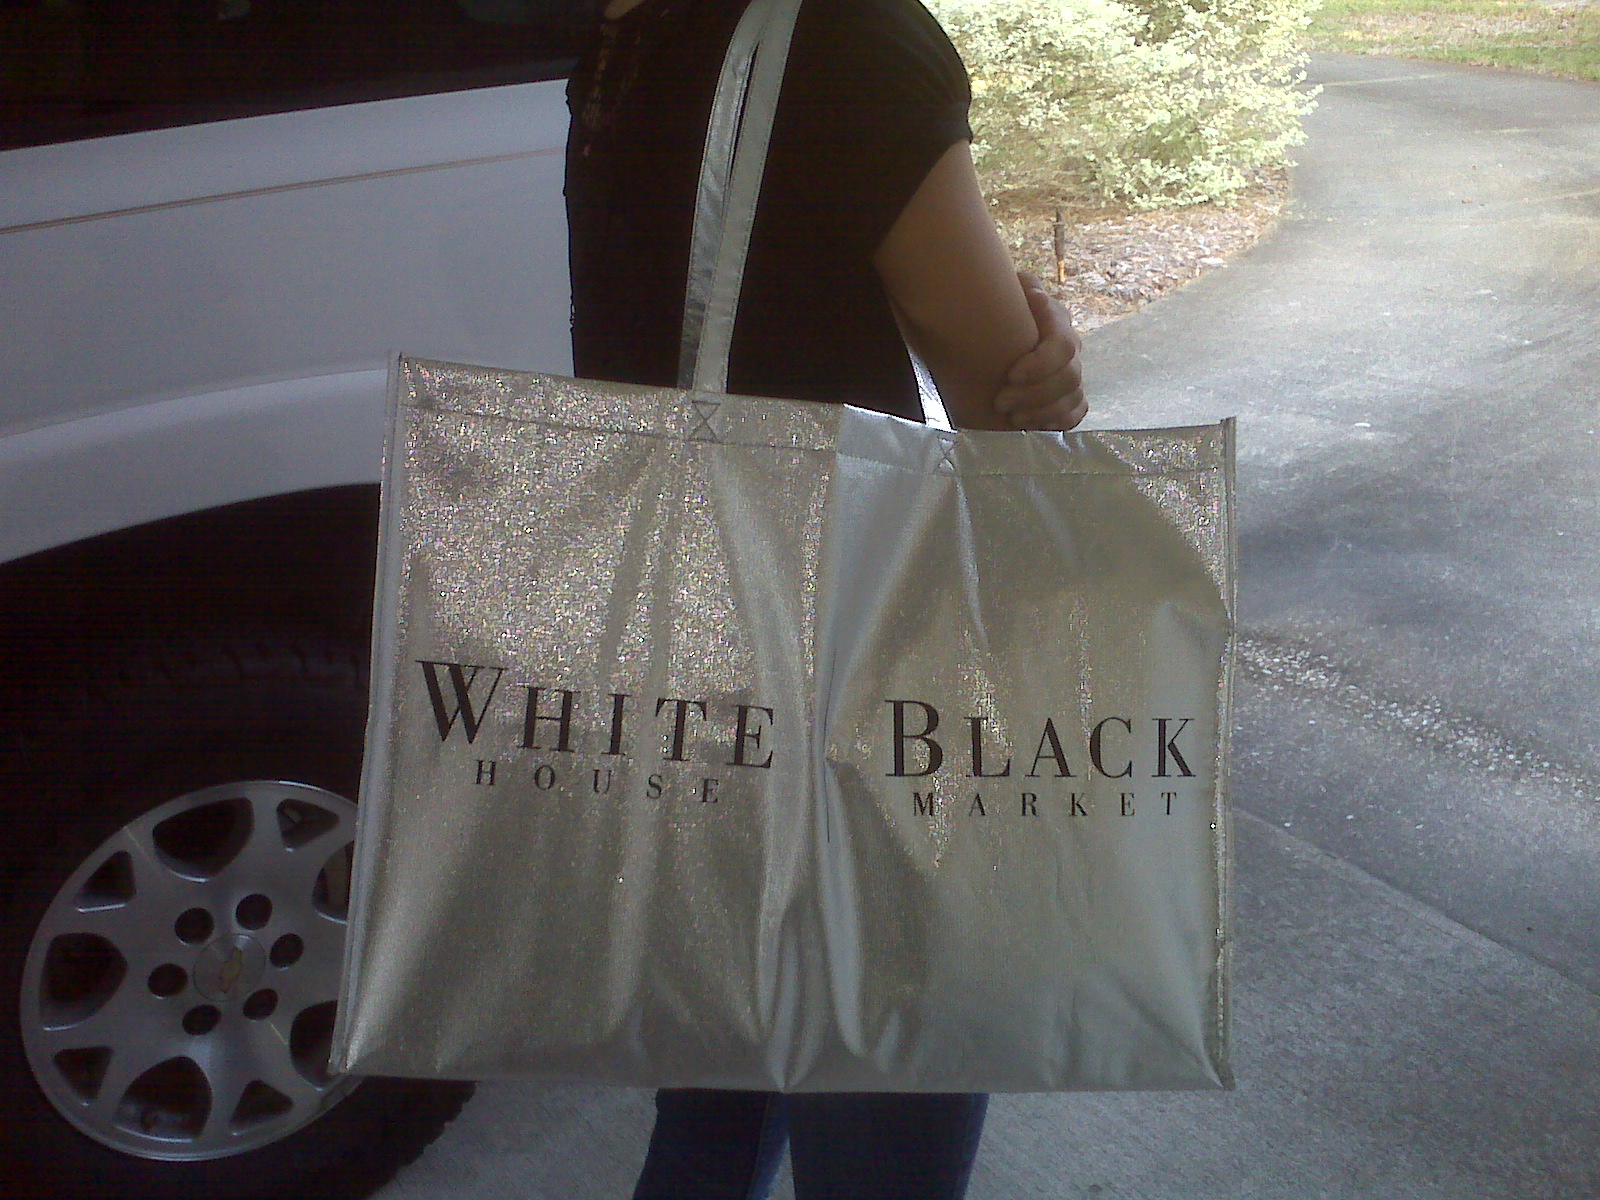 ... Bag You Gave Me, but Where is the Green in White House Black Market